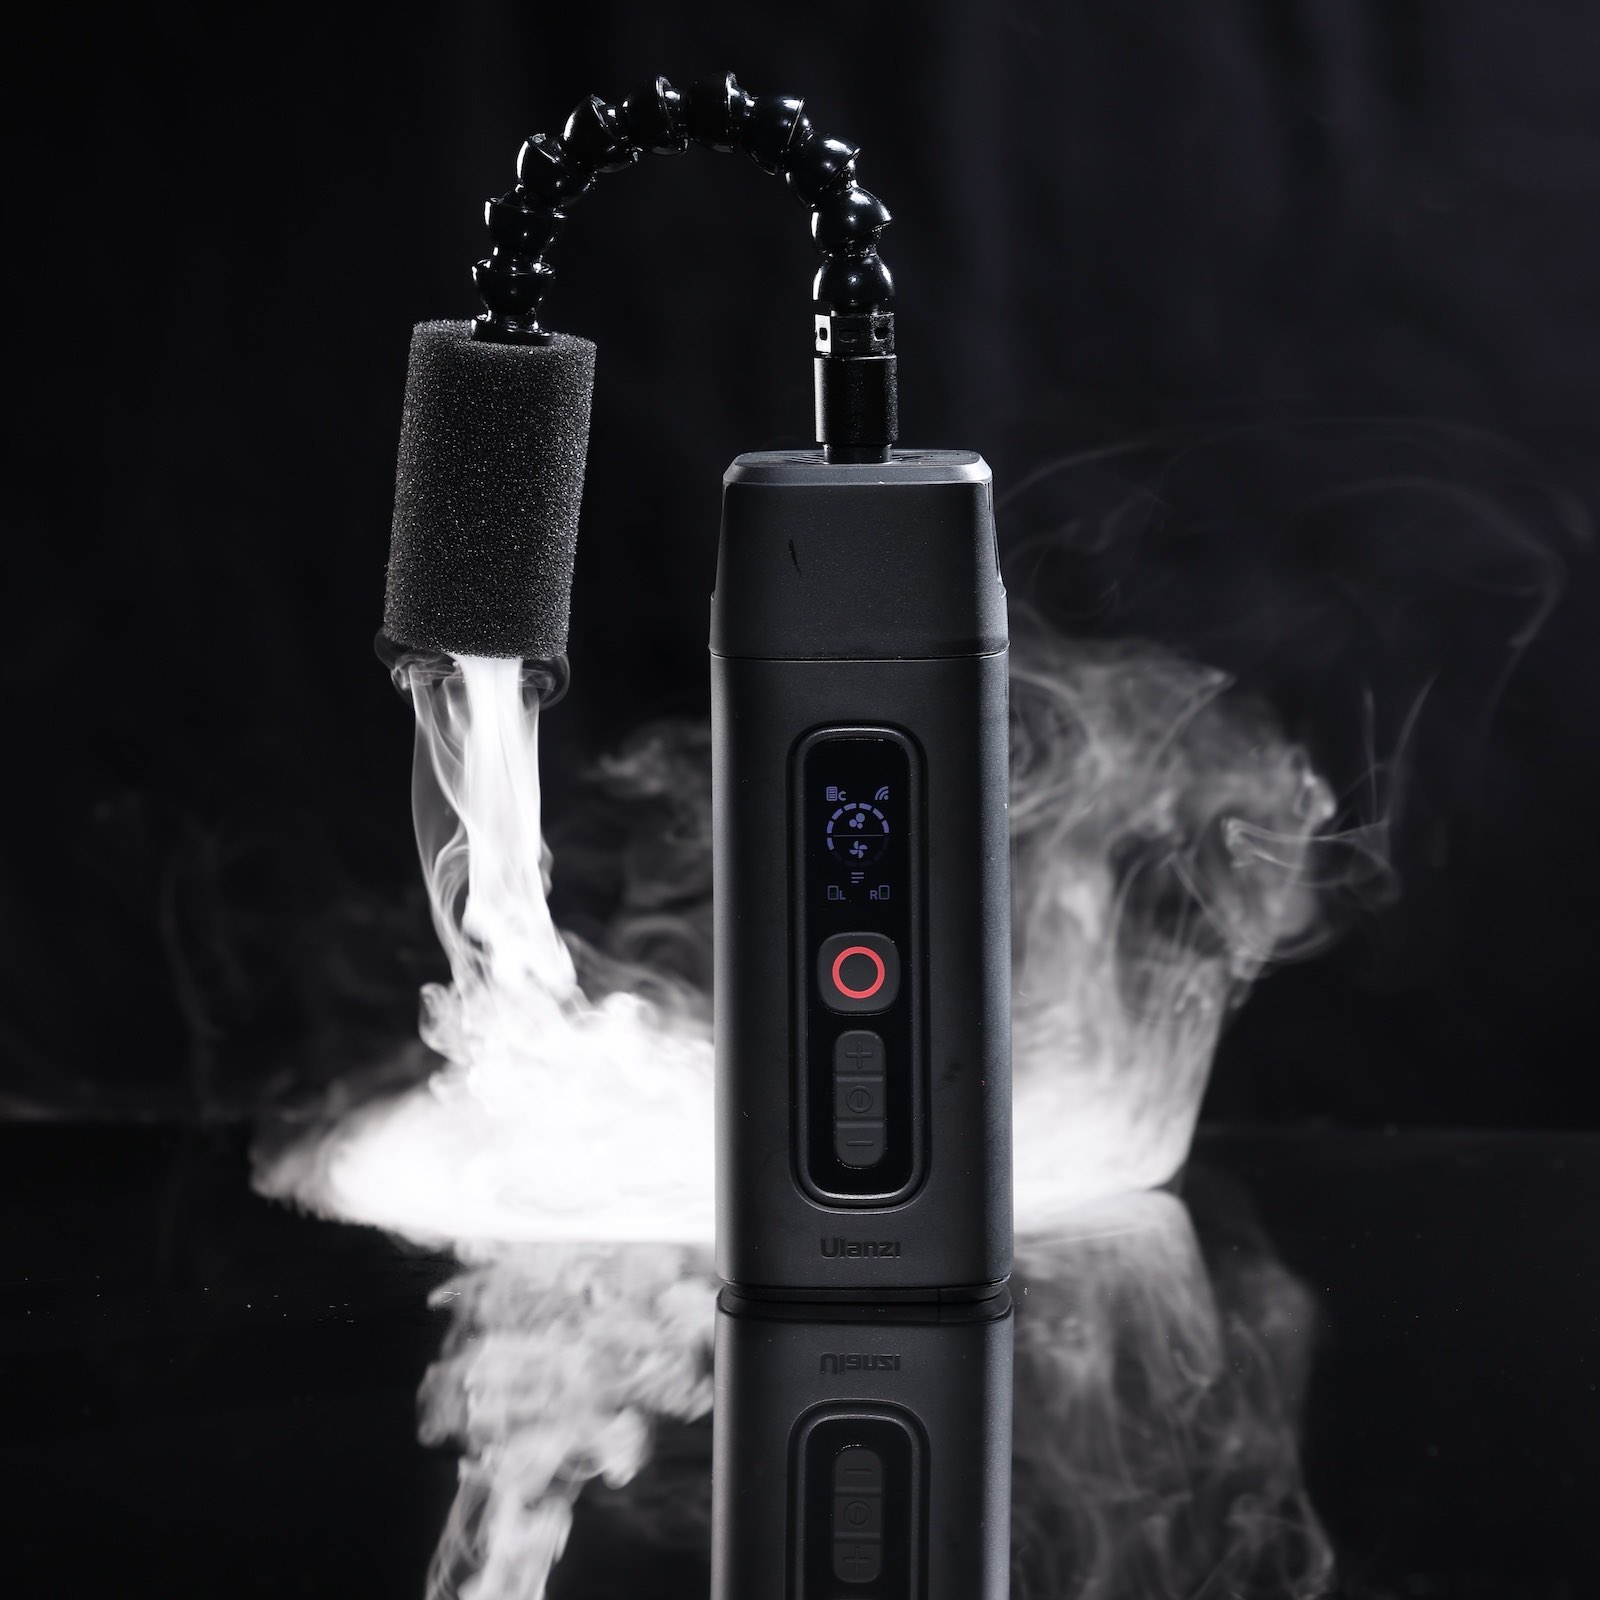 Ulanzi-announced-a-new-portable-fog-machine-for-video-photography-2.jpeg